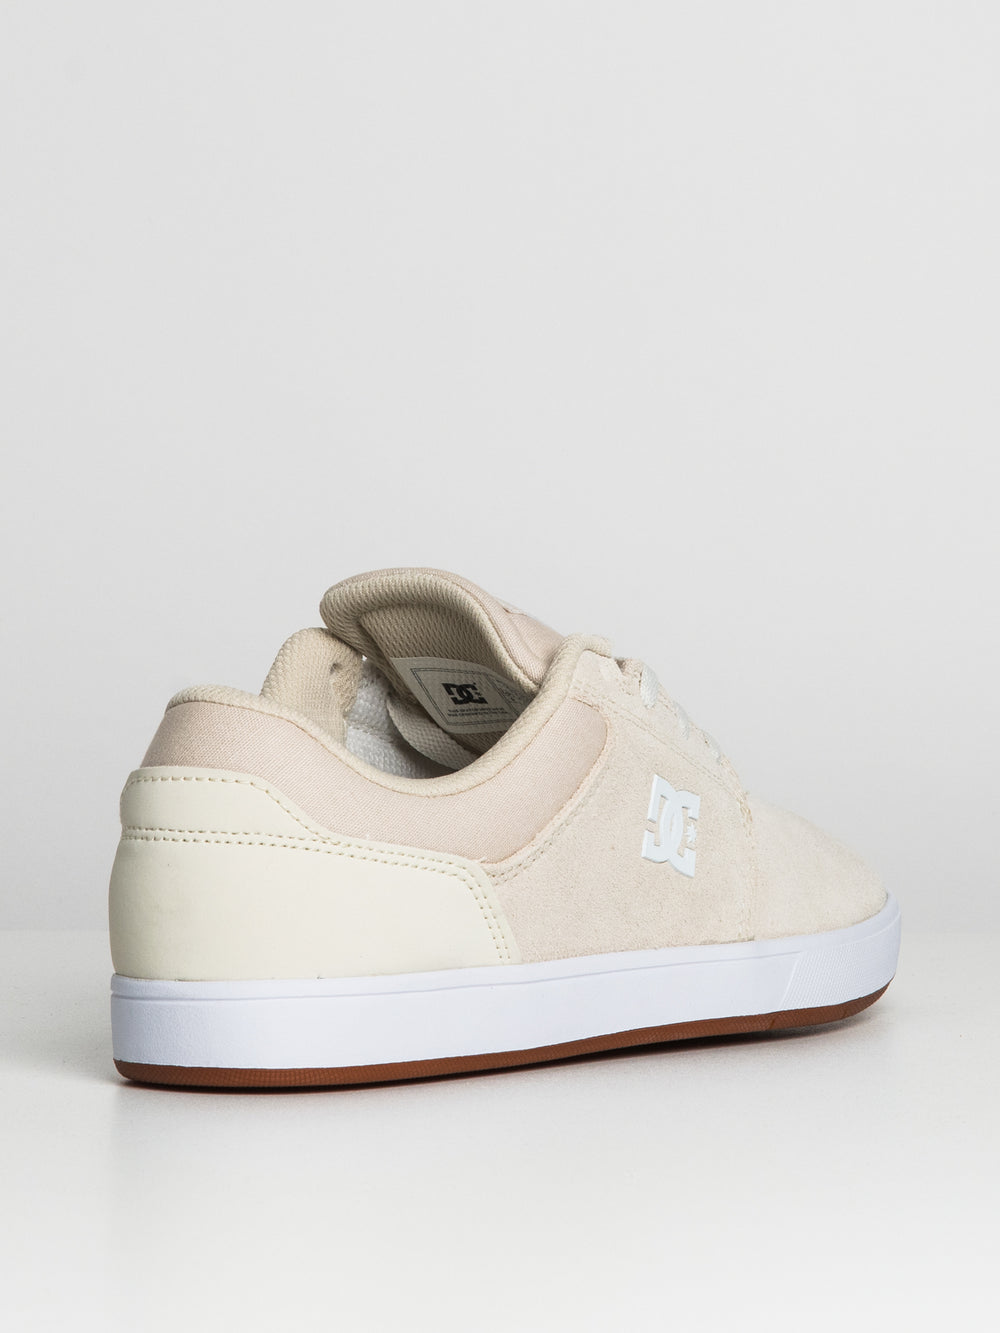 MENS DC SHOES CRISIS Collective 2 Footwear | Boathouse